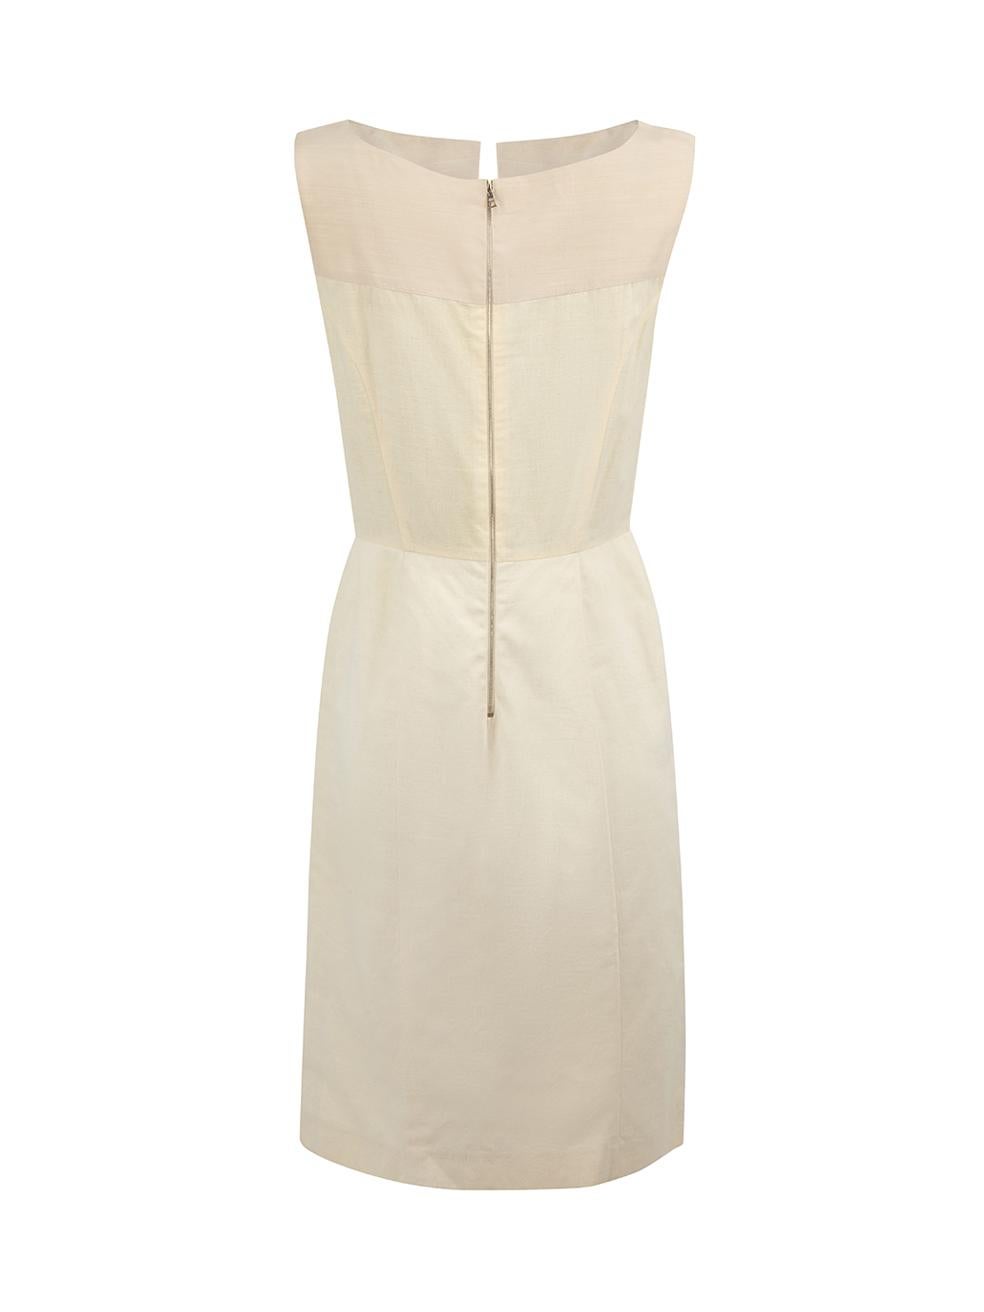 Narciso Rodriguez Ecru Panelled Sleeveless Dress Size M In Excellent Condition For Sale In London, GB